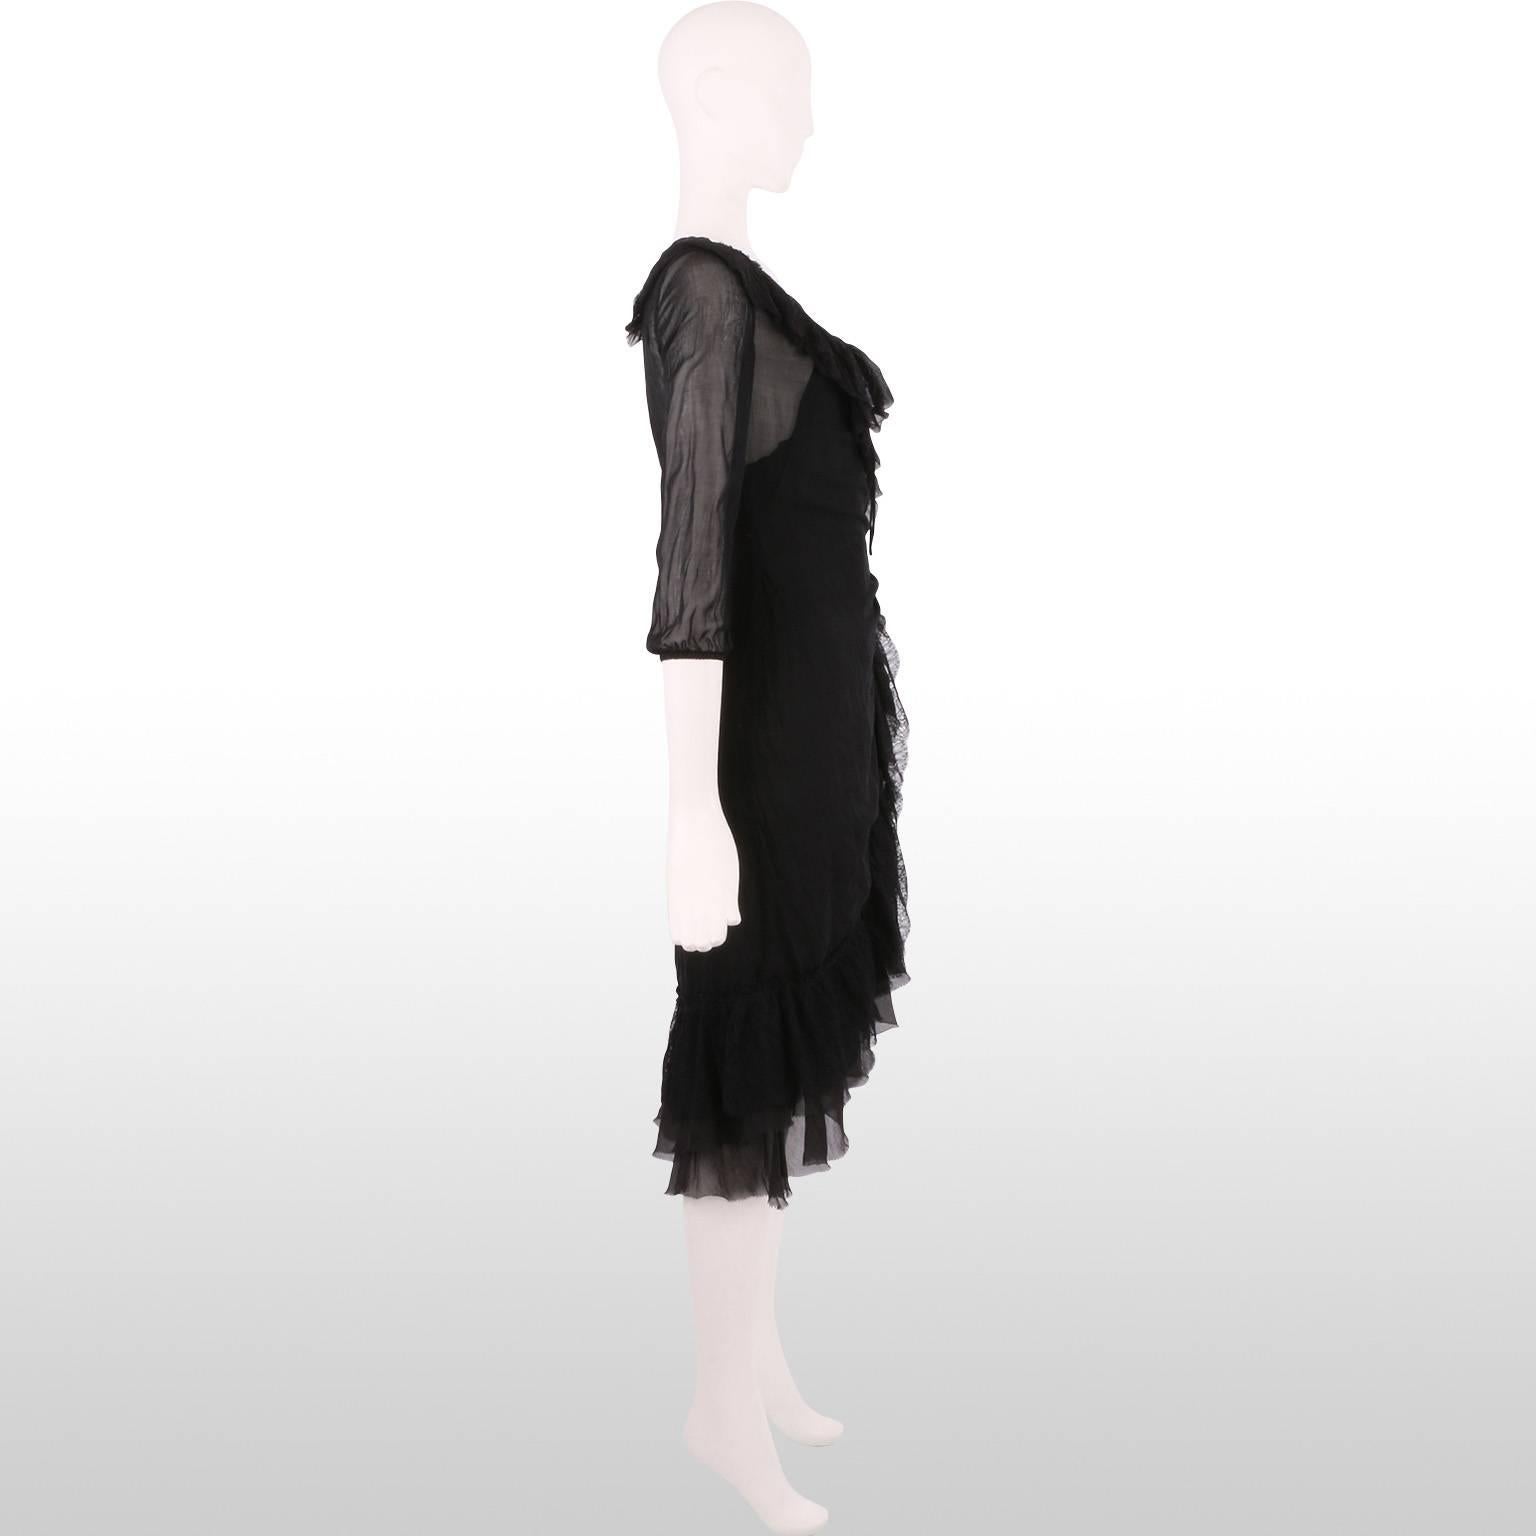 Prada Black Silk Overlay Dress with Lace In Excellent Condition For Sale In London, GB